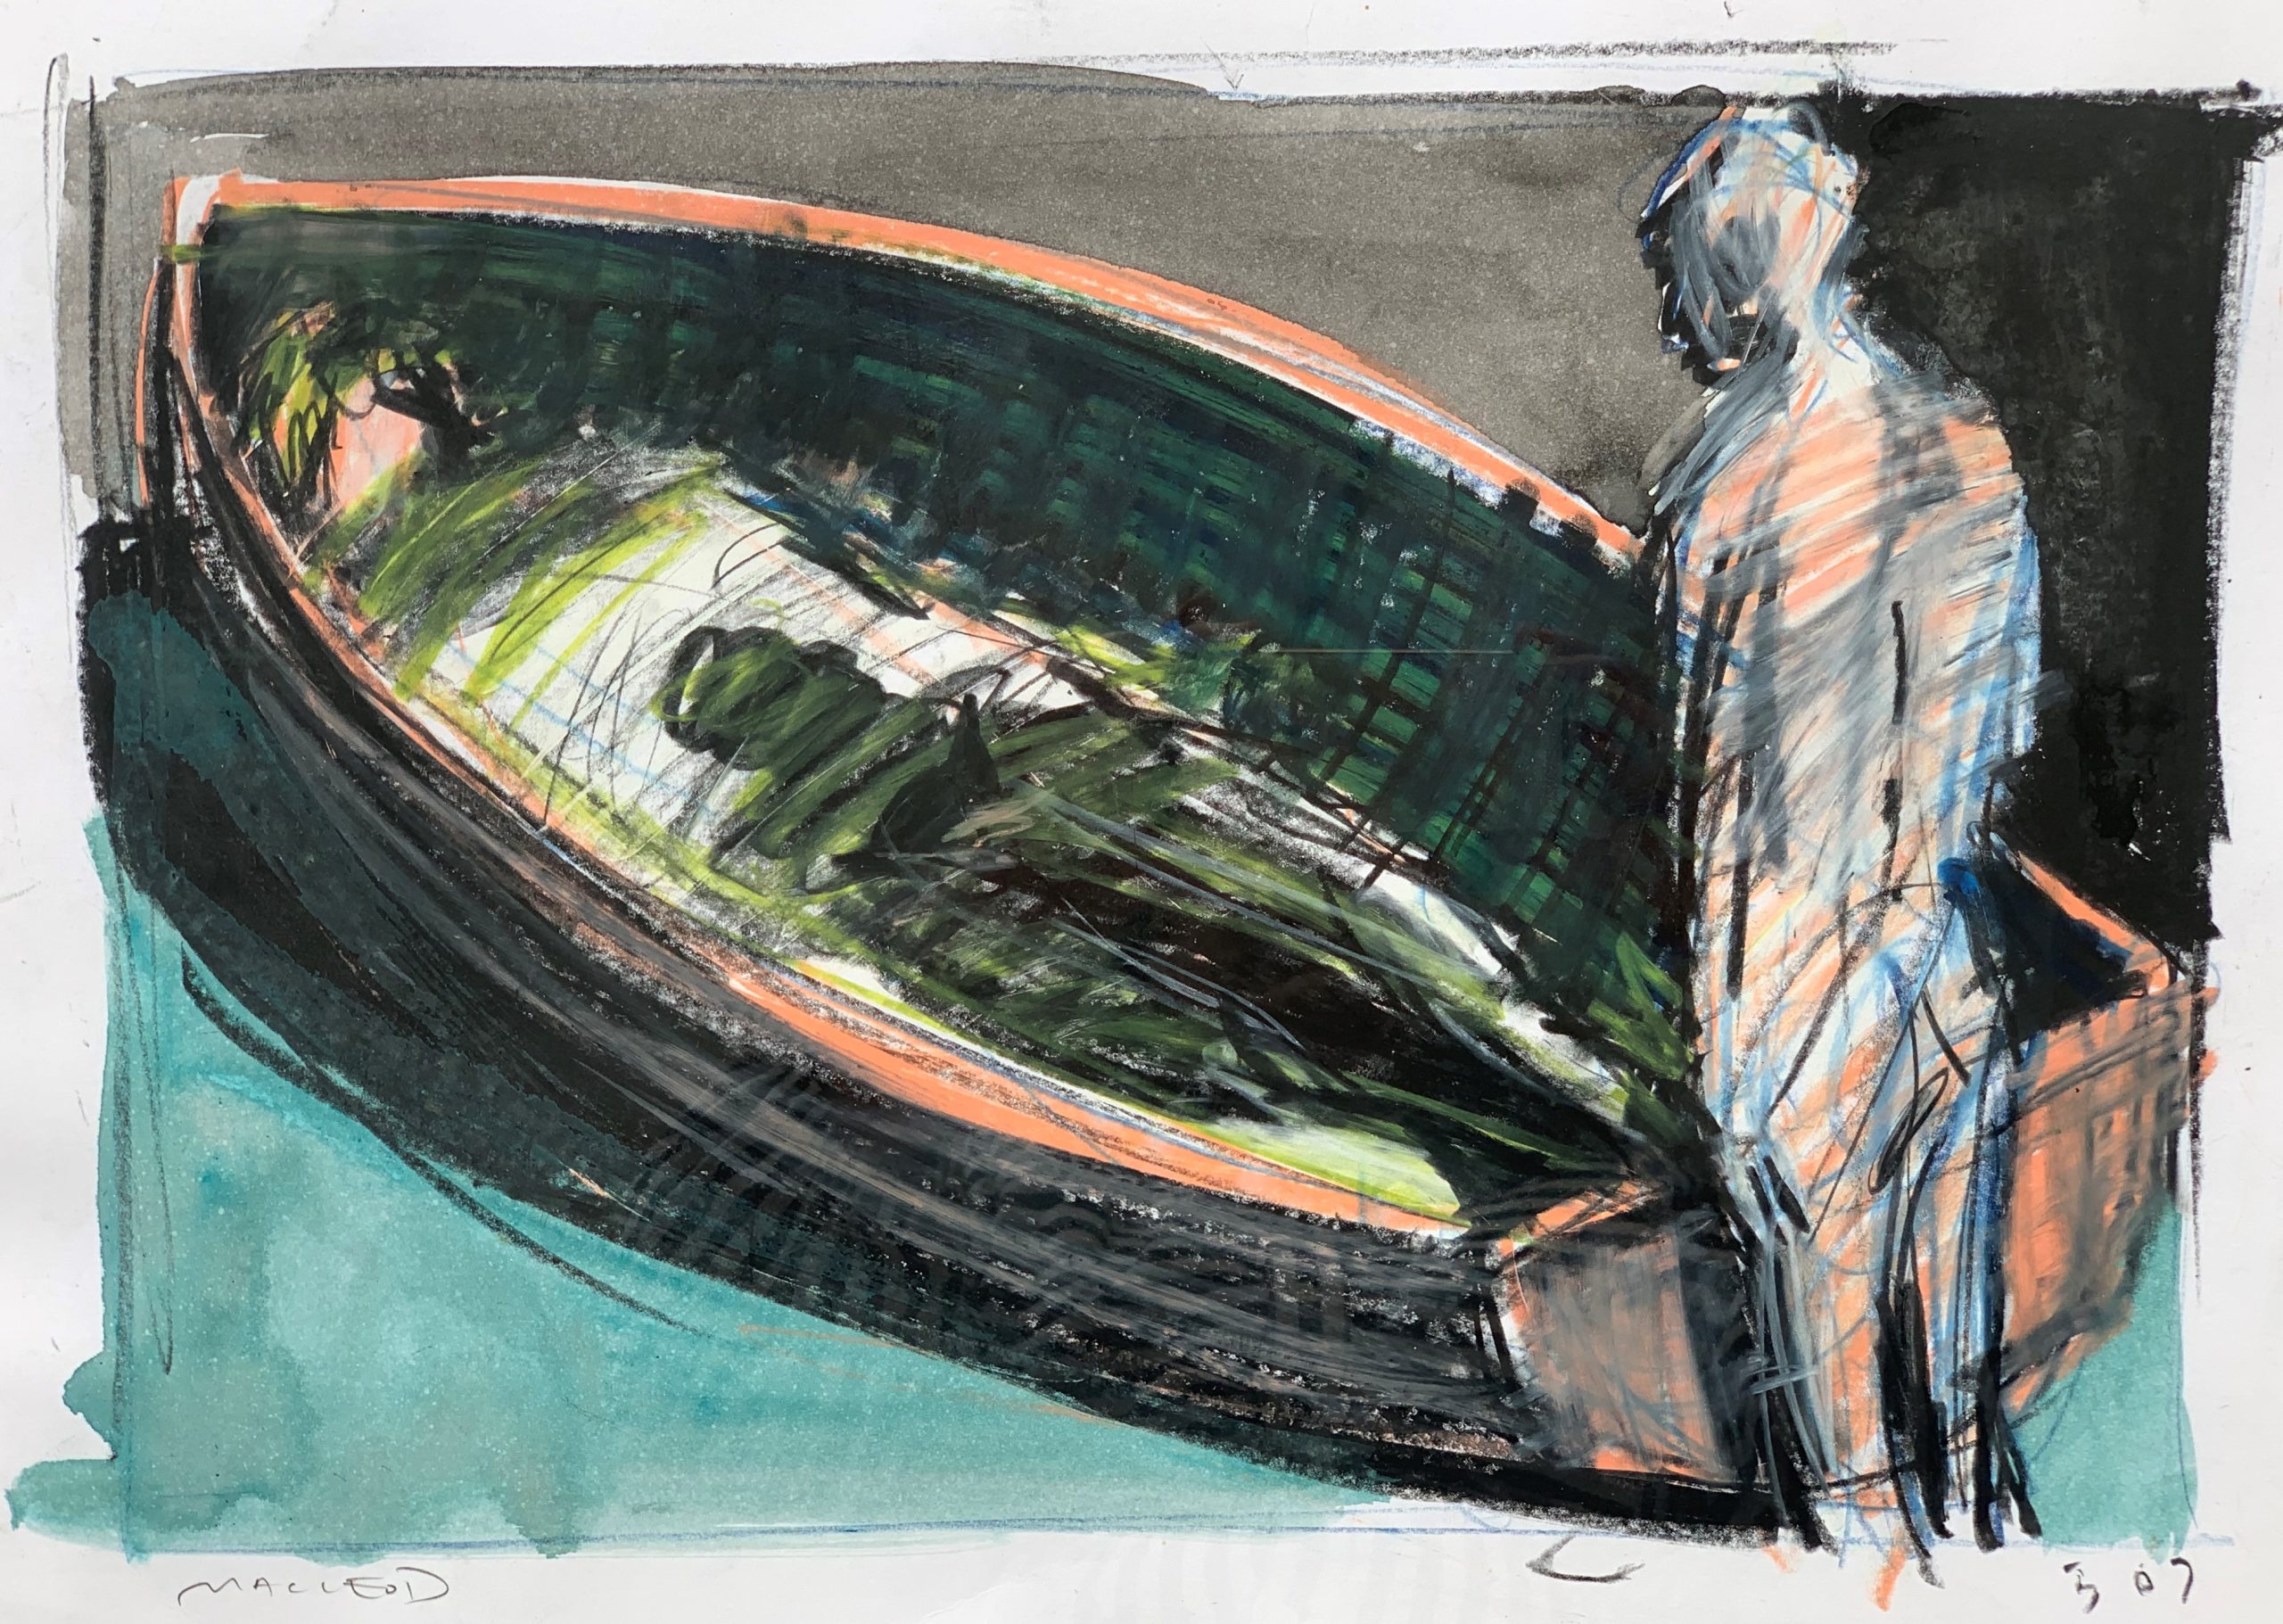 Euan MacLeod 'Untitled (Man and Boat)' gouache and crayon on paper 29 x 40cm $2,450